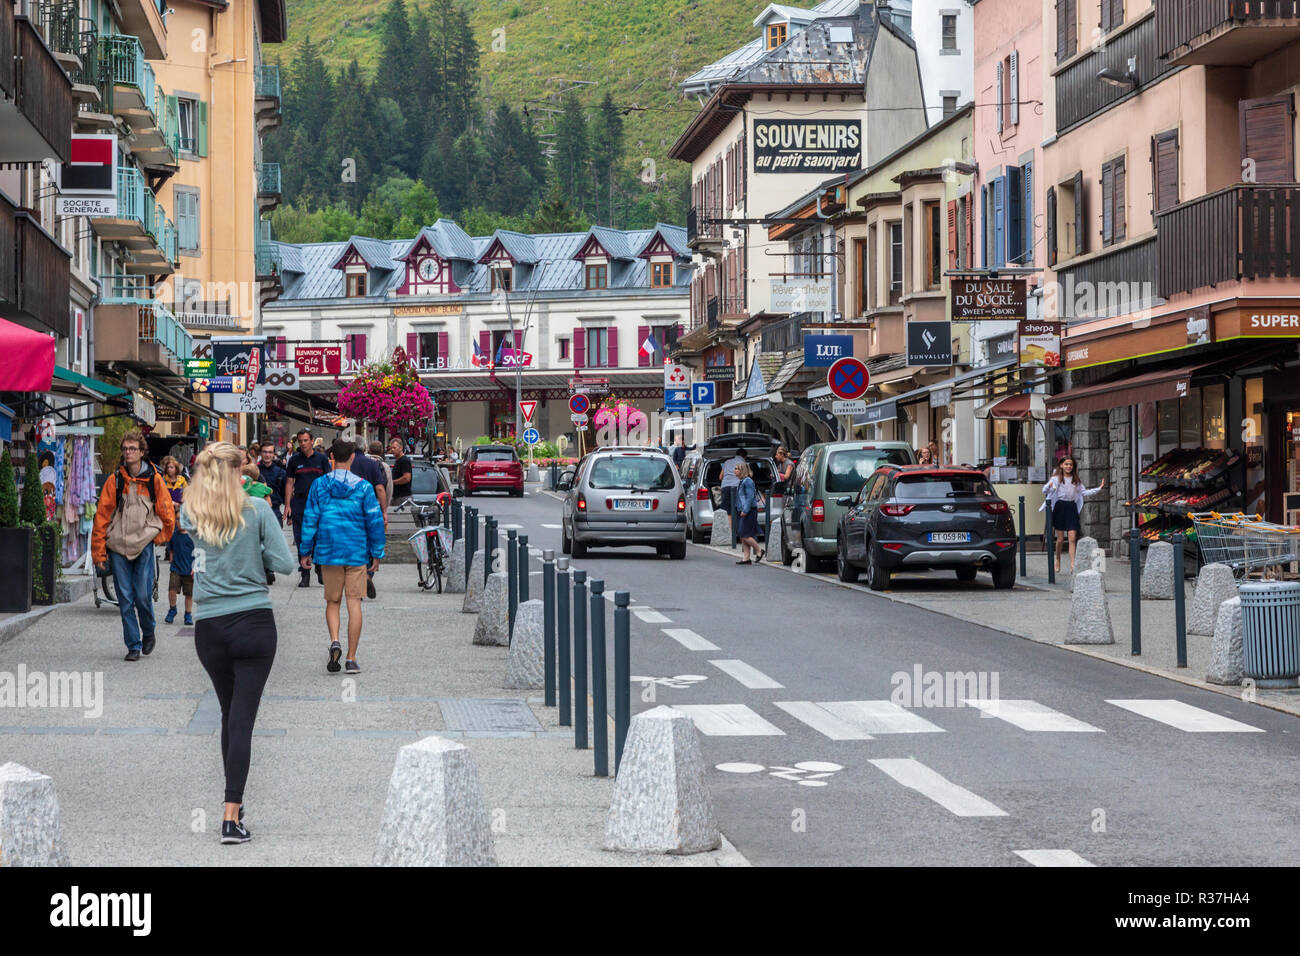 Shopping street the the French alpine town of Chamonix Stock Photo